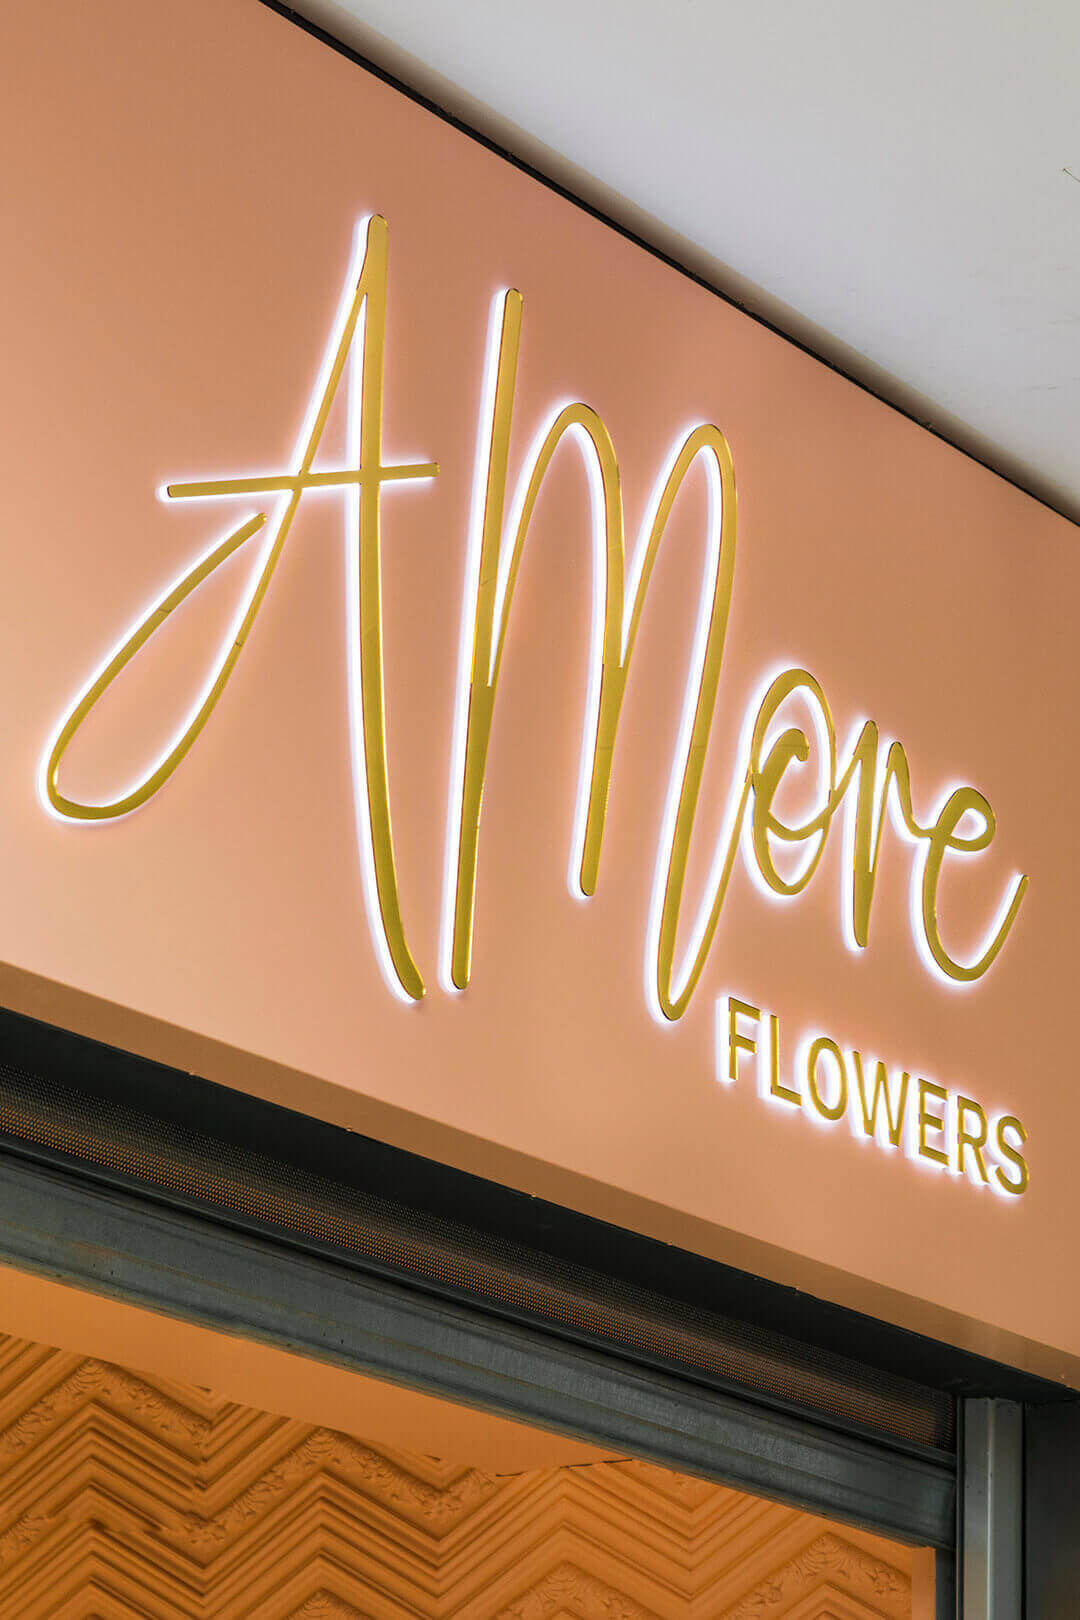 amore flor amor flave - amore-flowers-casette-gdynia-riviera-casette-gold-letters-illuminated-coffer-casette-over-store-casette-over-entry-morelowe-florist (11) 